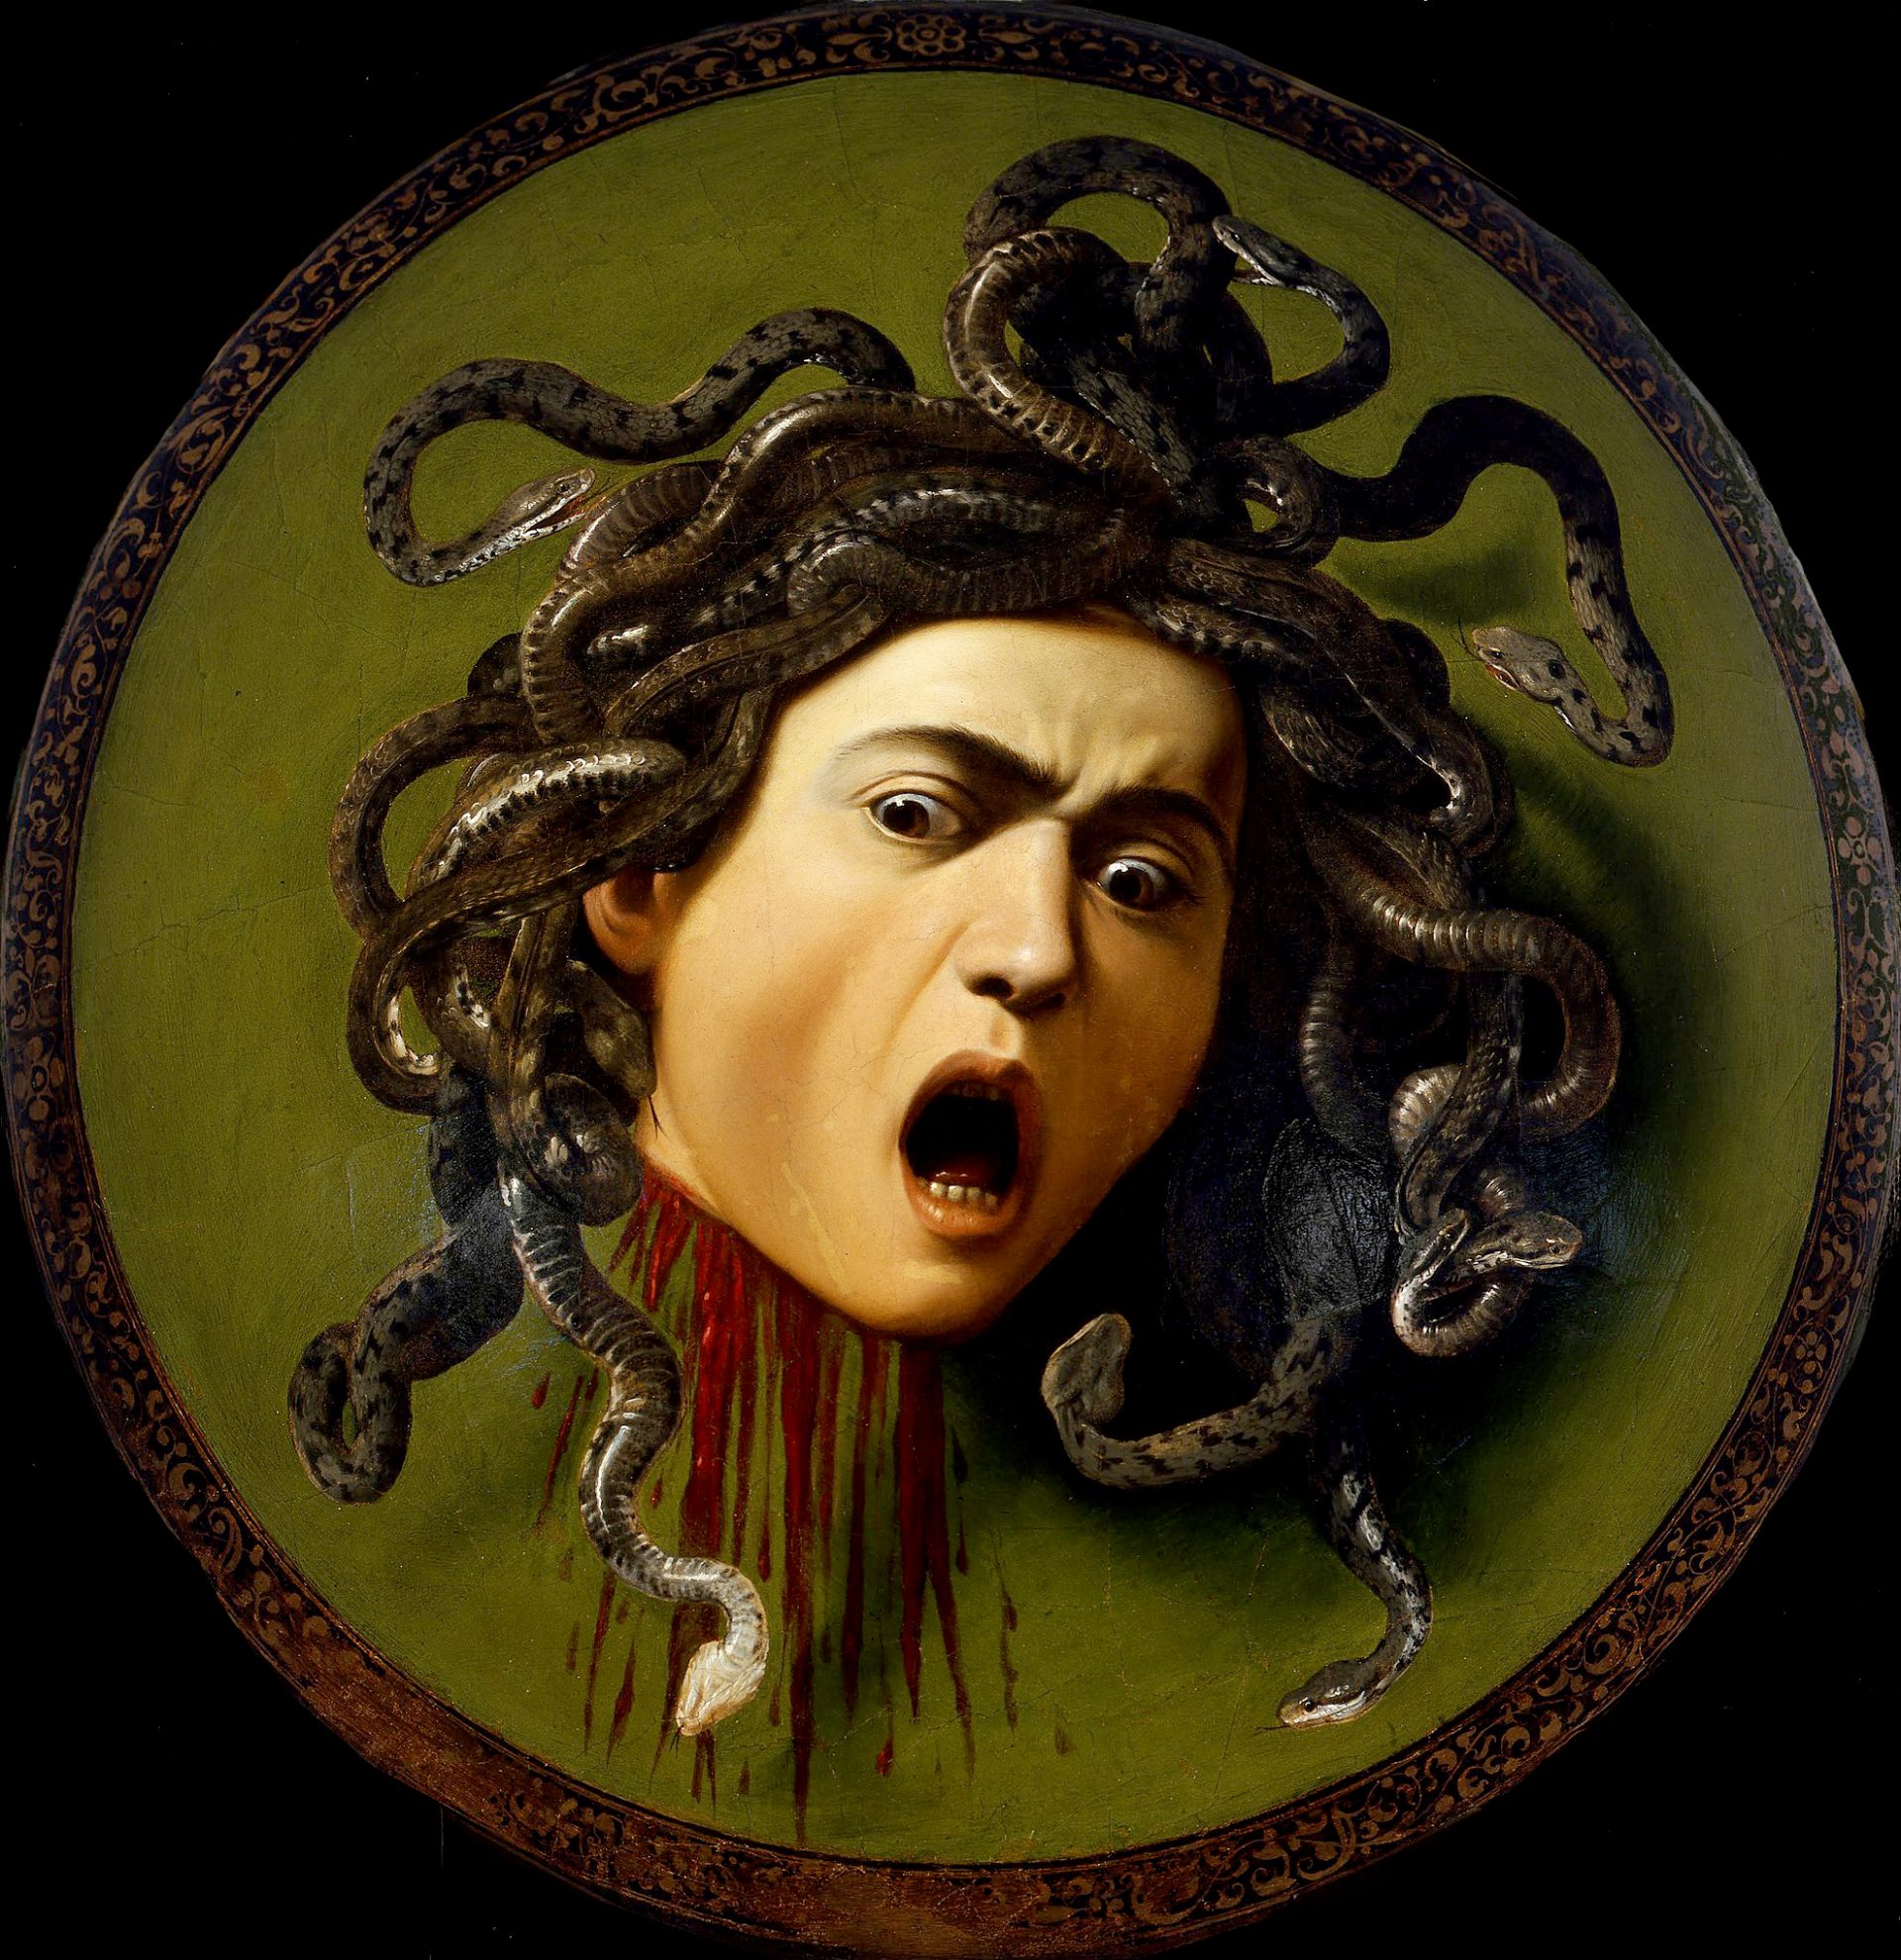 A painting of a severed head of a woman with snakes for hair. The woman’s face is distorted in horror and pain, as blood spurts from her neck. The painting is on a round wooden shield, and the woman’s eyes and mouth are wide open. The snakes are various shades of green, brown, and gray, and they twist and curl around the woman’s head. The background is dark and indistinct. The painting is based on a Greek myth in which the woman, Medusa, was killed by the hero Perseus, who used a mirrored shield to avoid her petrifying gaze. The painting is also a self-portrait of the artist, Caravaggio, who used his own face as a model for Medusa.